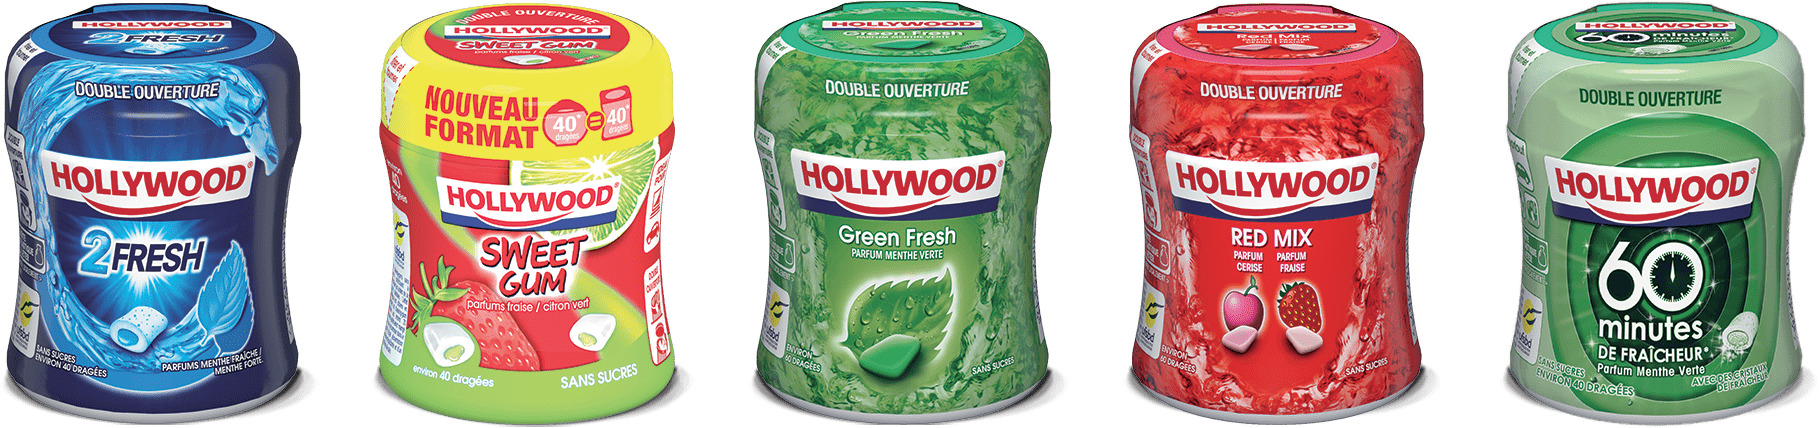 Hollywood Chewing Gum Packs png